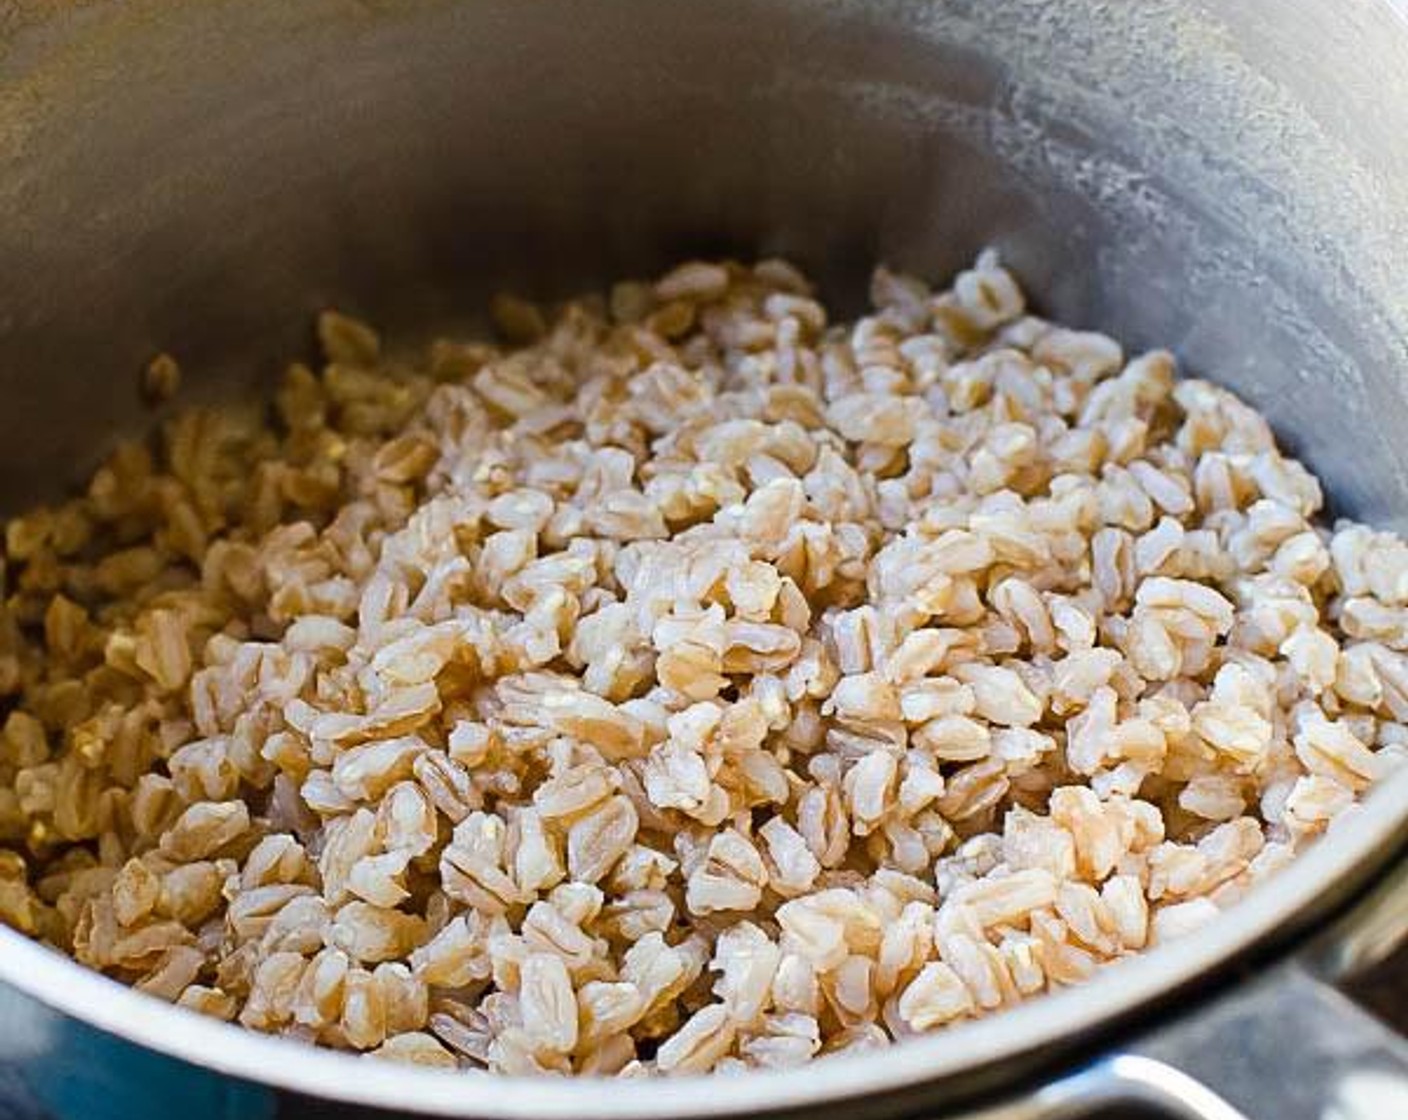 step 1 Fill a medium pot halfway with water and heat to boiling. Add Salt (1/2 tsp) and then stir in the Farro (3/4 cup). Reduce heat to a simmer and cook the farro until tender, about 20 to 25 minutes. Drain the farro and let cool to room temperature.